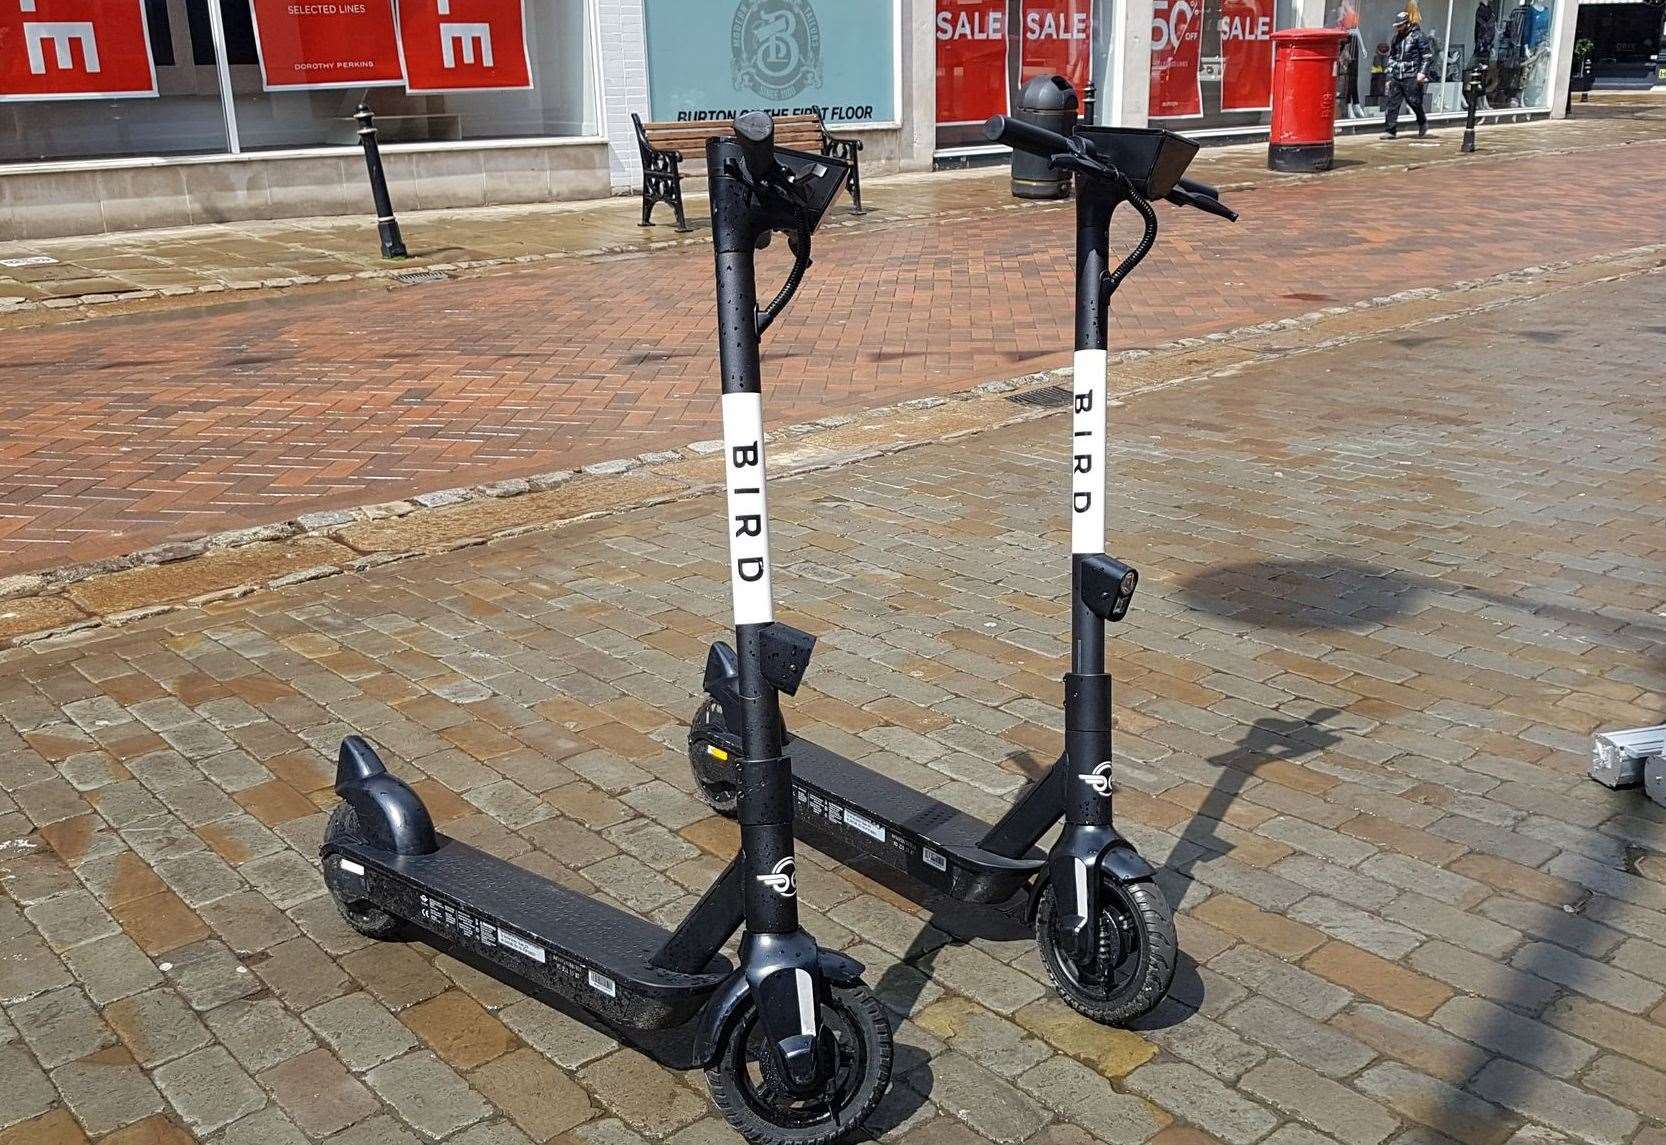 Electric scooters are available for hire in Canterbury as part of a government-backed trial